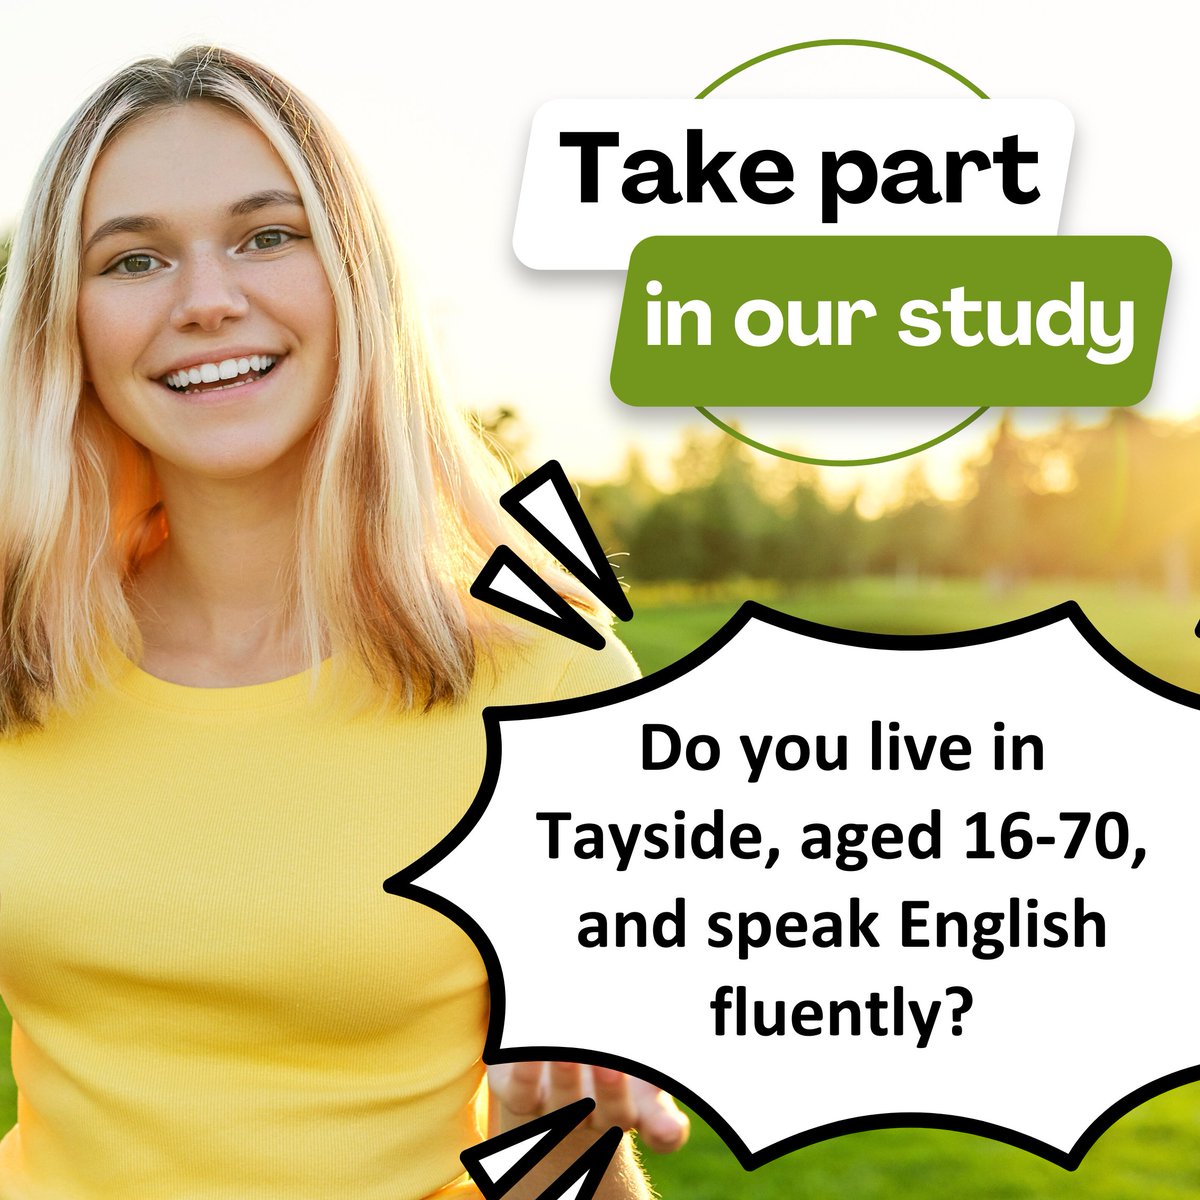 👋 Are you based in #Tayside? We are seeking volunteers aged 16-70 who are fluent English speakers, without hearing aids or speech disorders, to participate in the Brain Waves for Hearing study. 😃 Please contact 01382 383235 if interested. ✅ registerforshare.org/studies/165